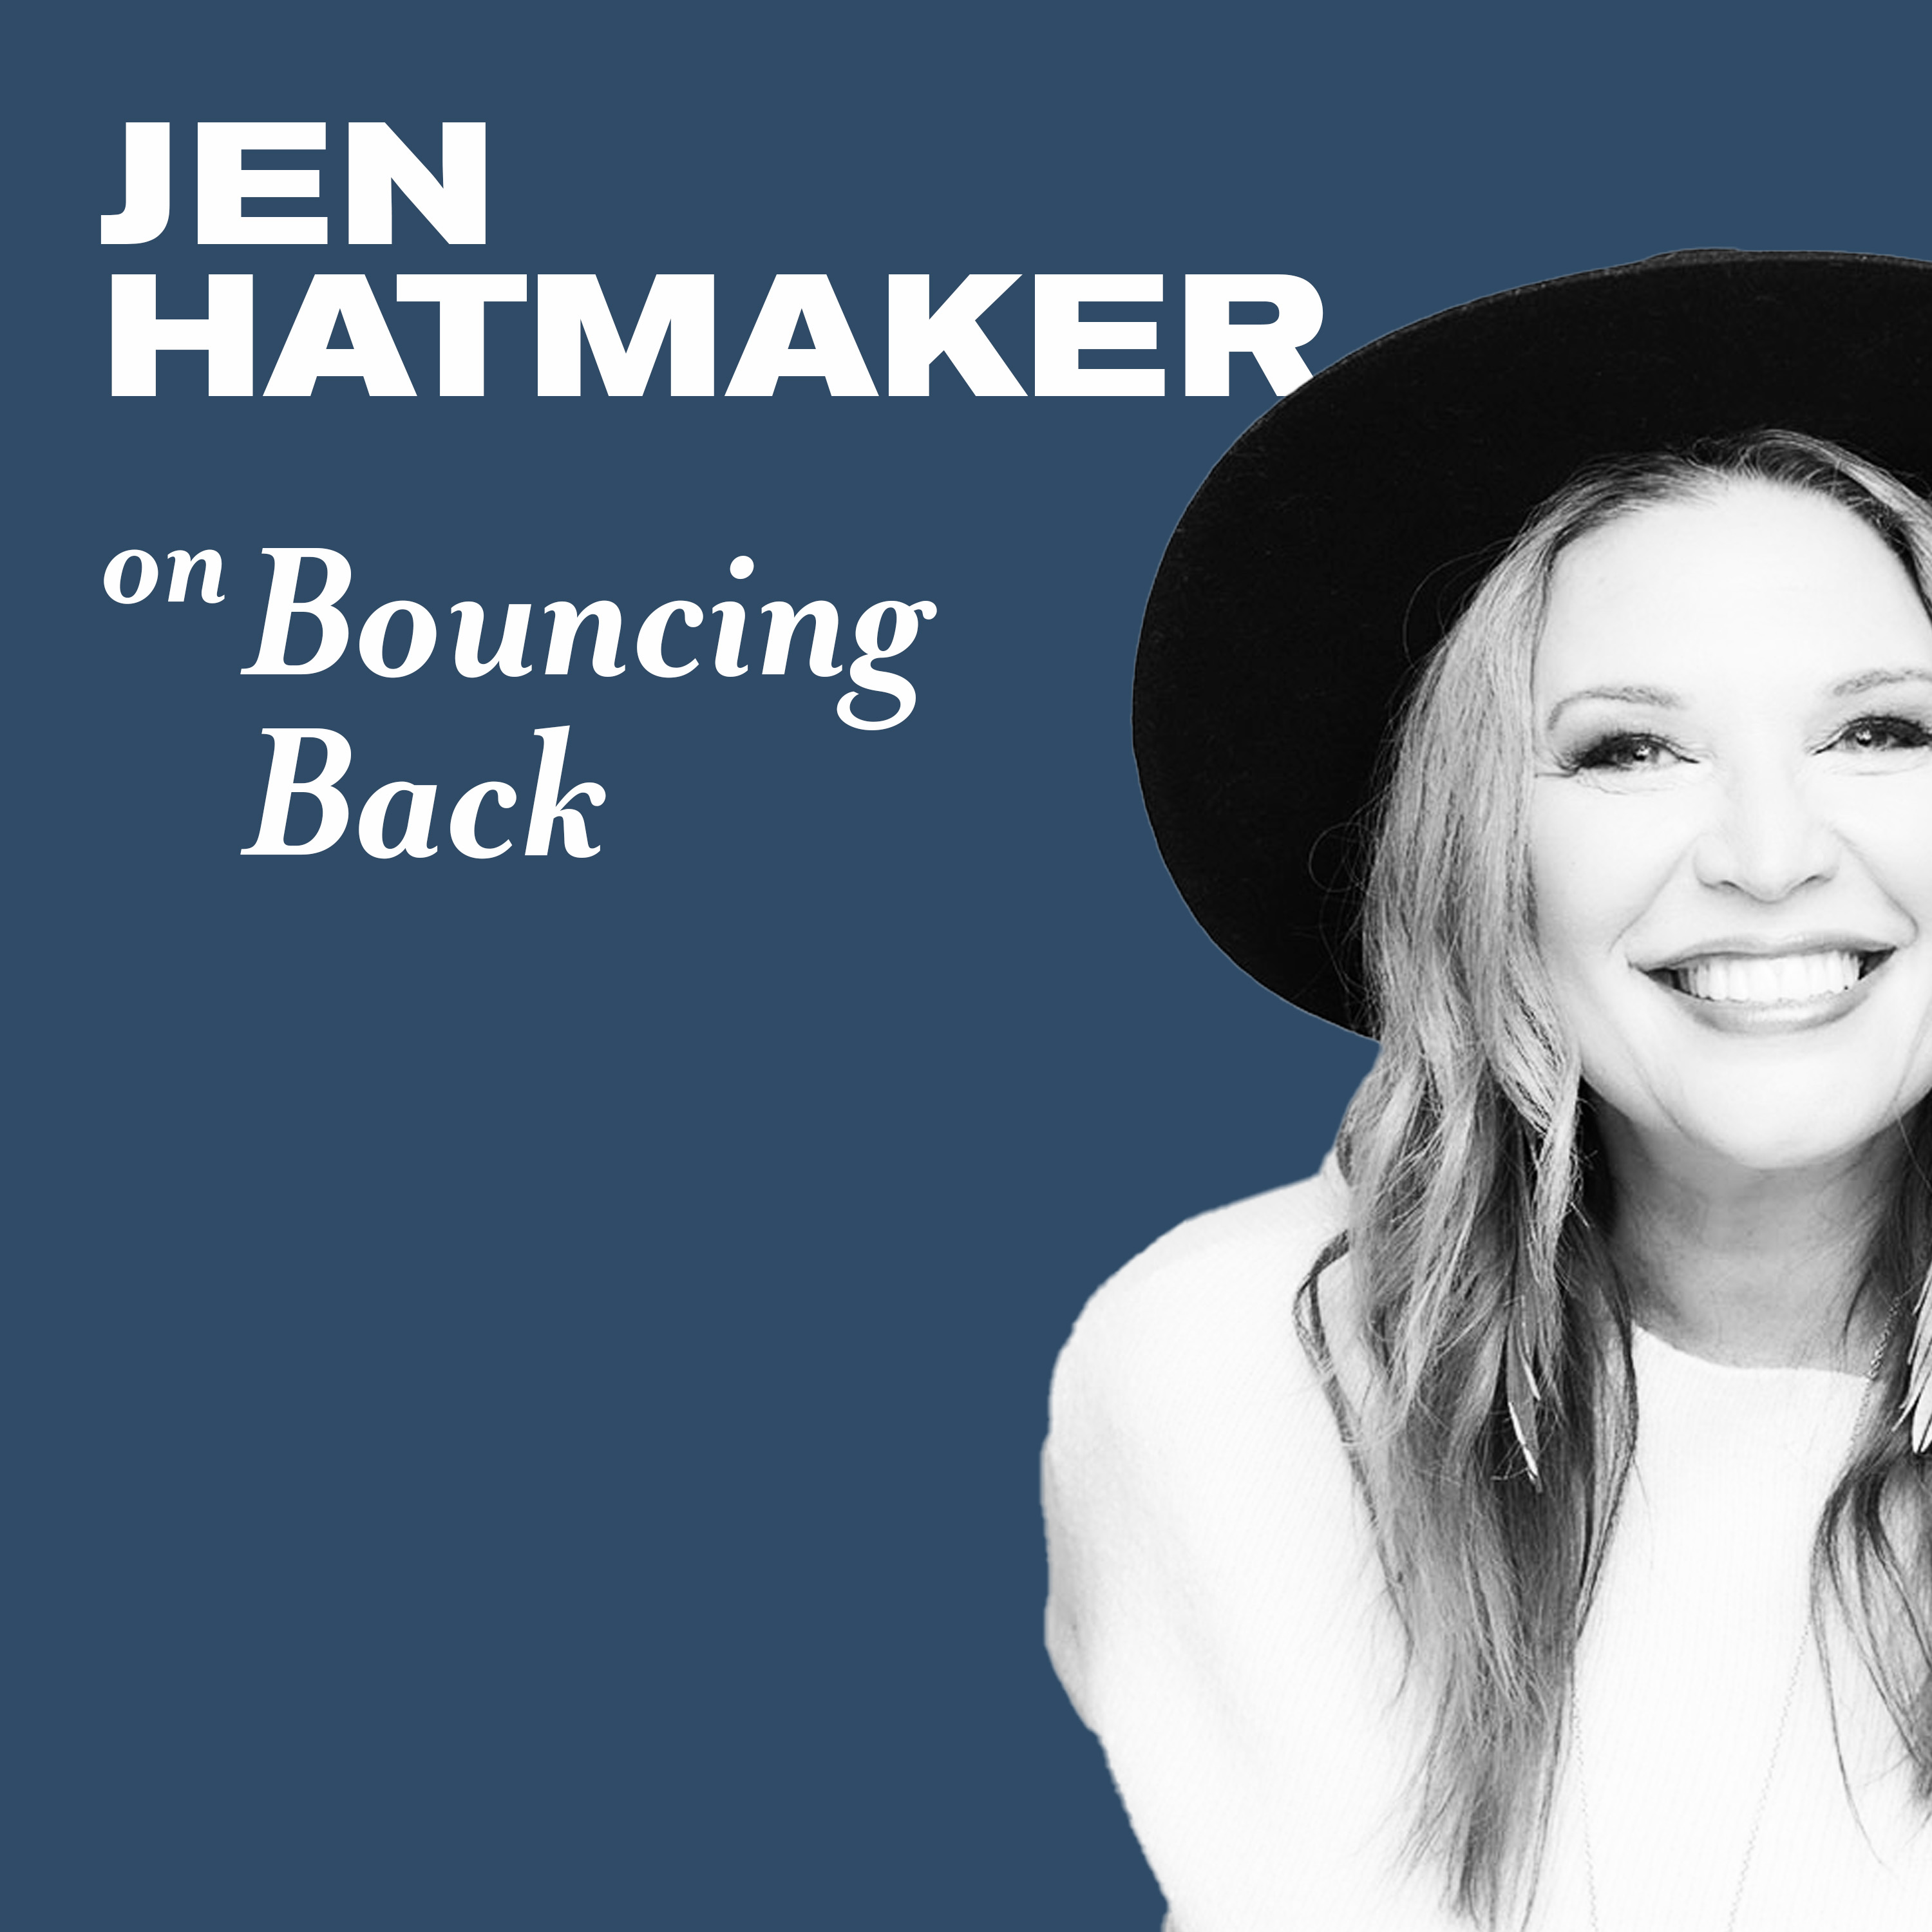  Jen Hatmaker on Bouncing Back and Finding Meaning